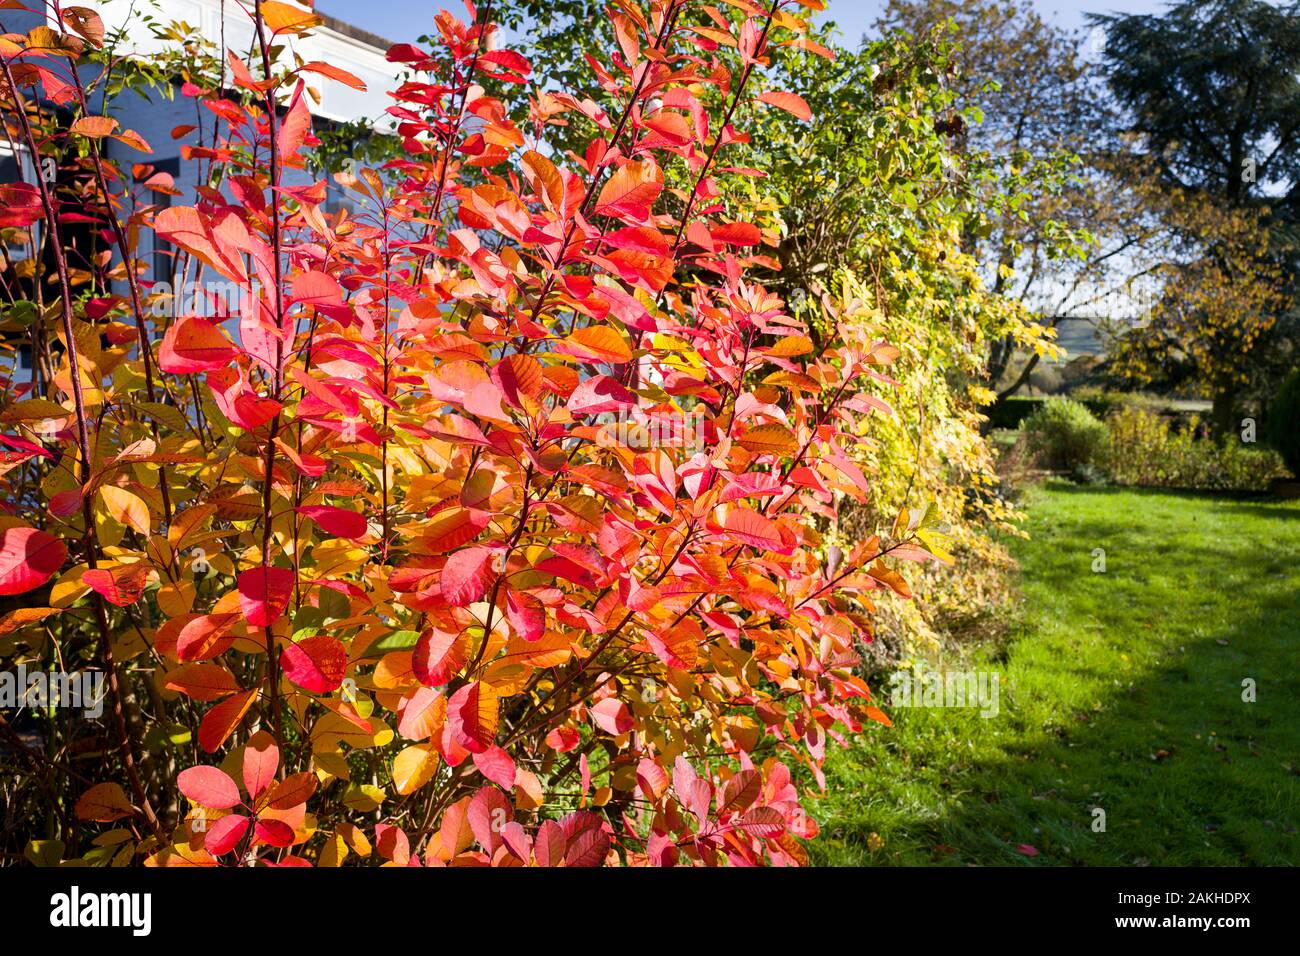 Bright red leaves of Cotinus coggygria Flame (AGM) adding seasonal colour to the garden in October in an English garden Stock Photo